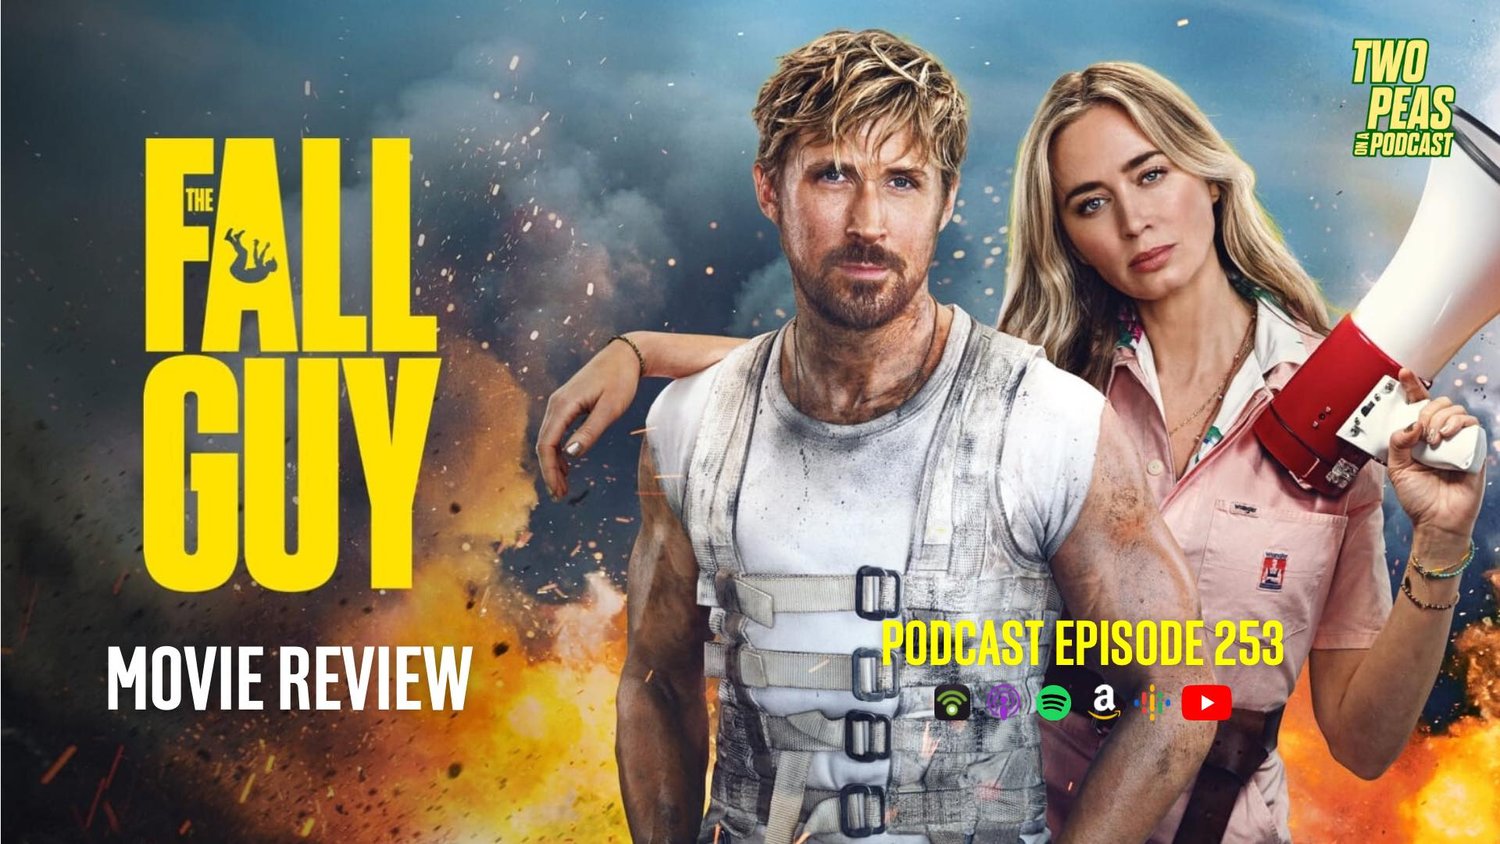 THE FALL GUY Movie Review (253)